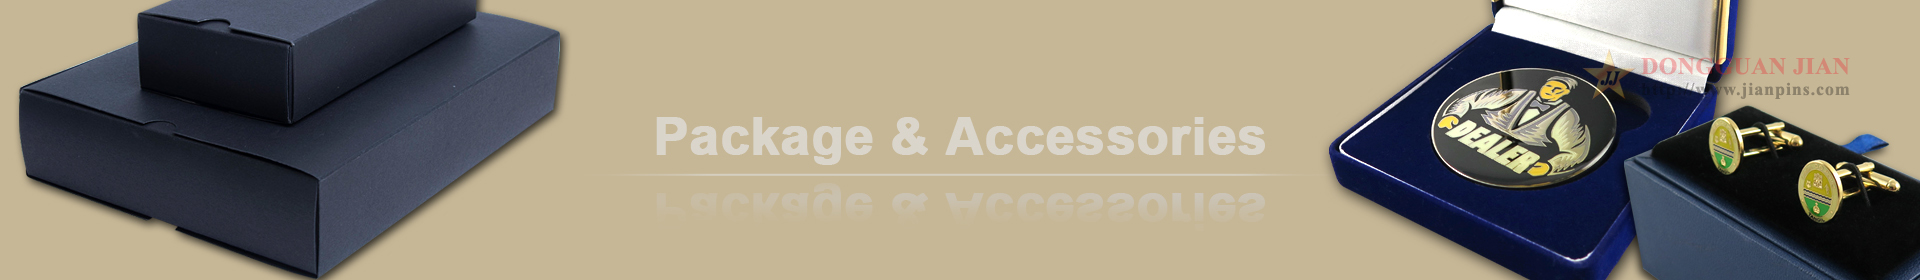 emballage & accessoires